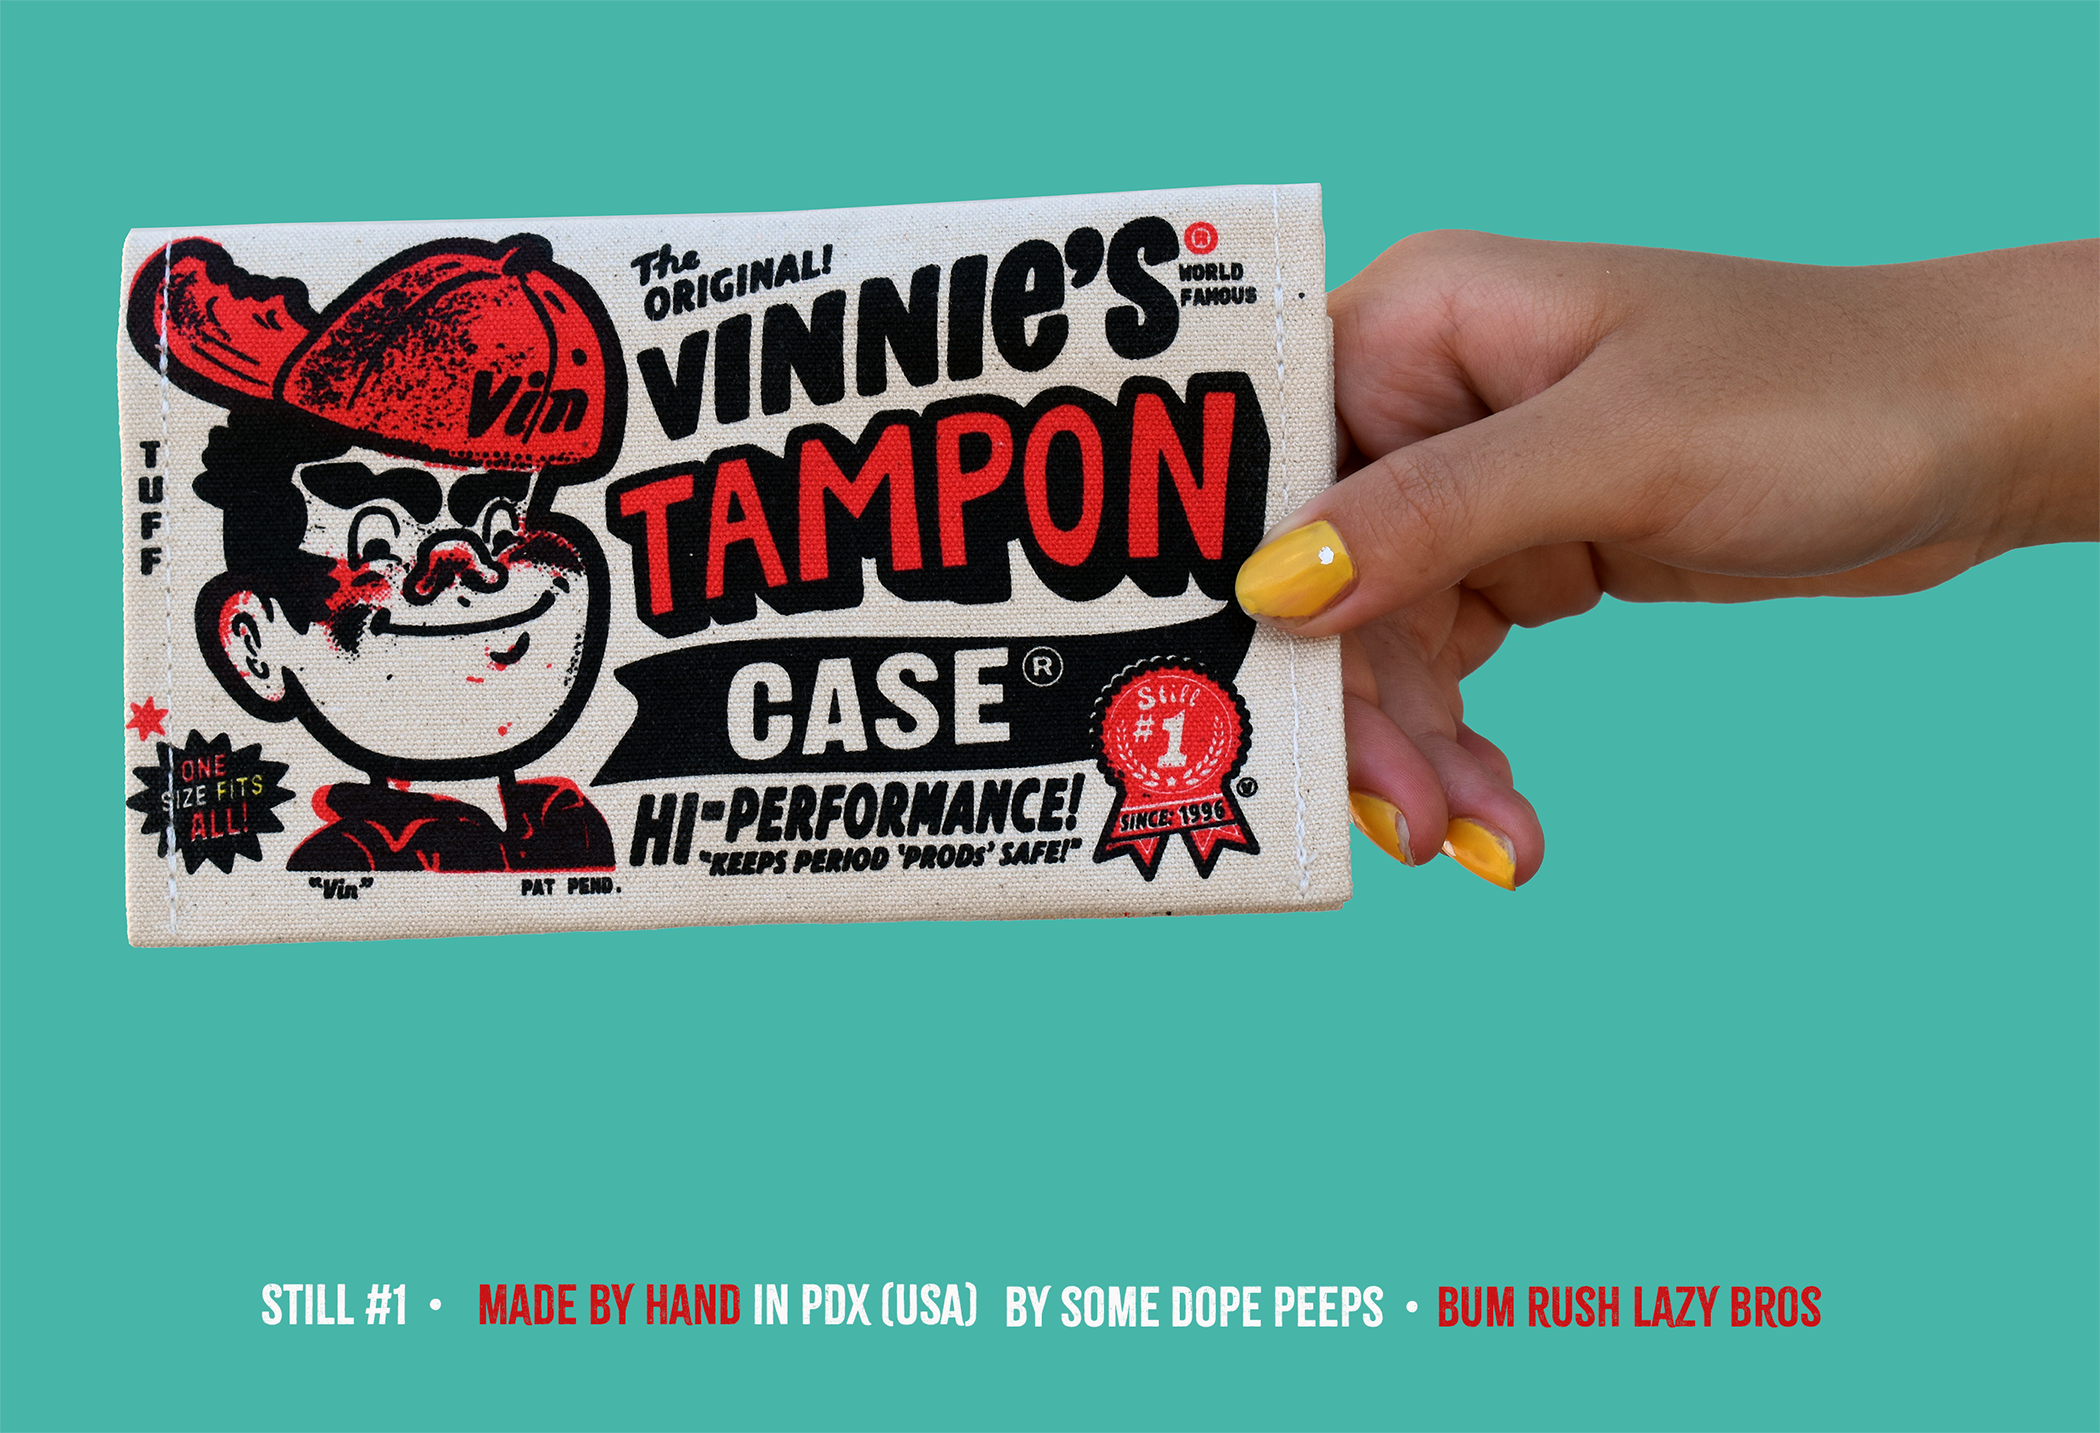 Vinnie's tampon case at the Museum of Menstruation and Women's Health